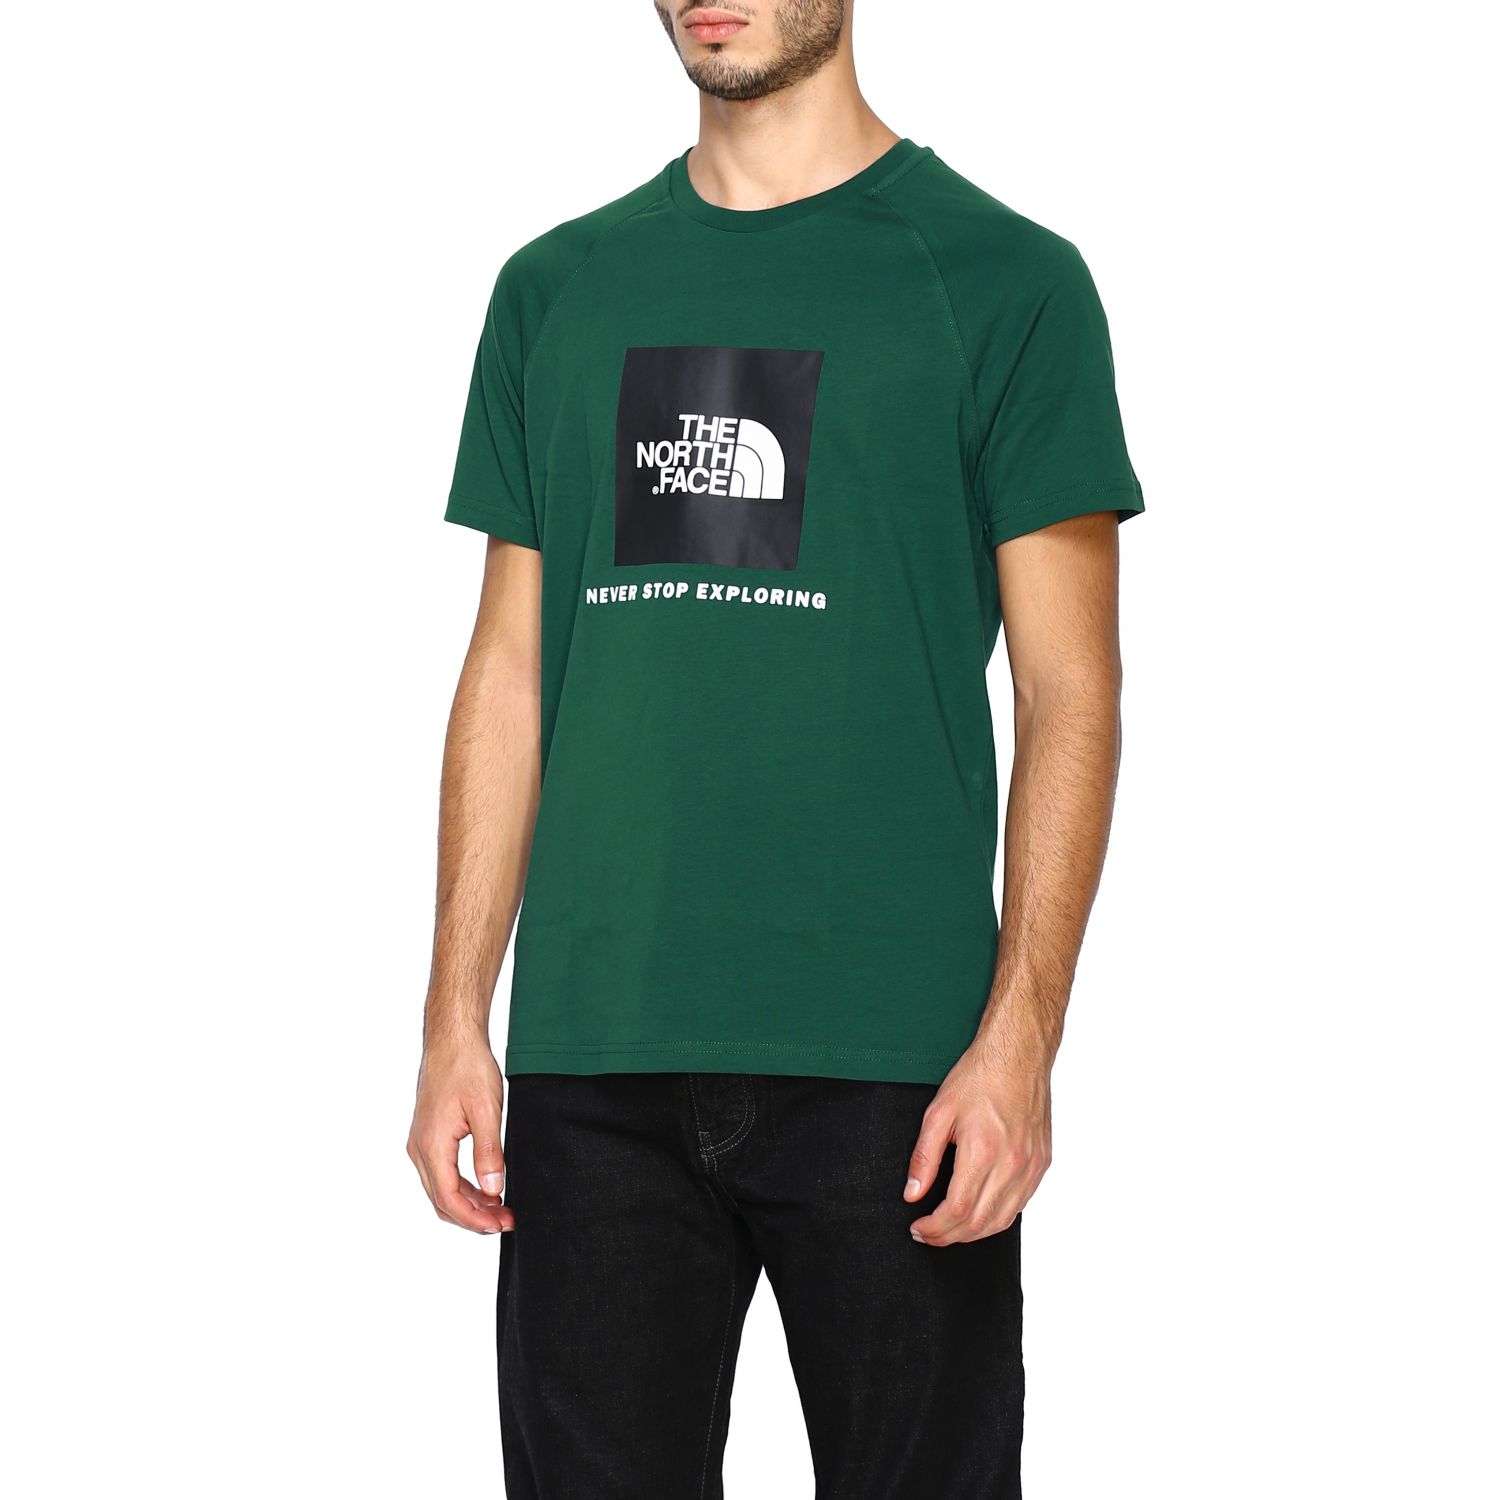 T-Shirt The North Face NF0A3BQON Giglio EN